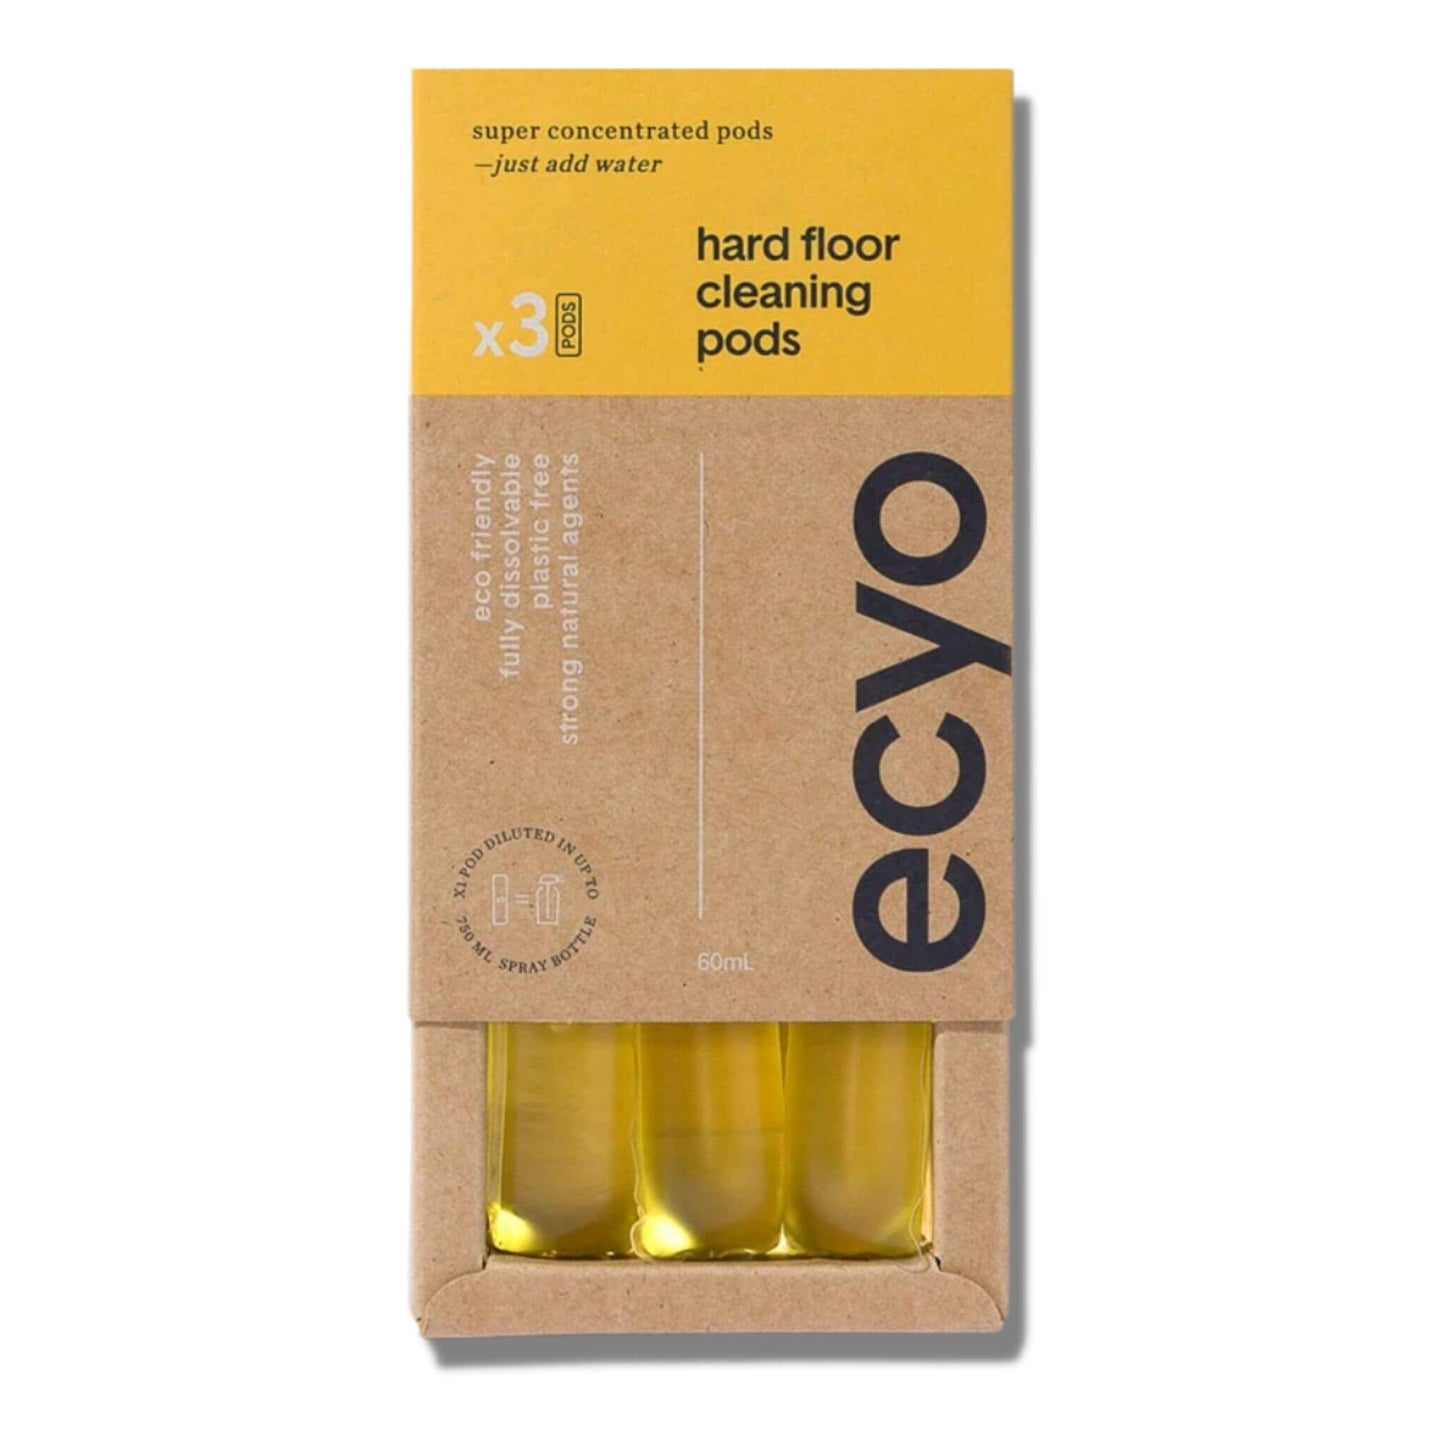 ecyo disolving cleaning pods - hard floor cleaning pods open box with 3 pods